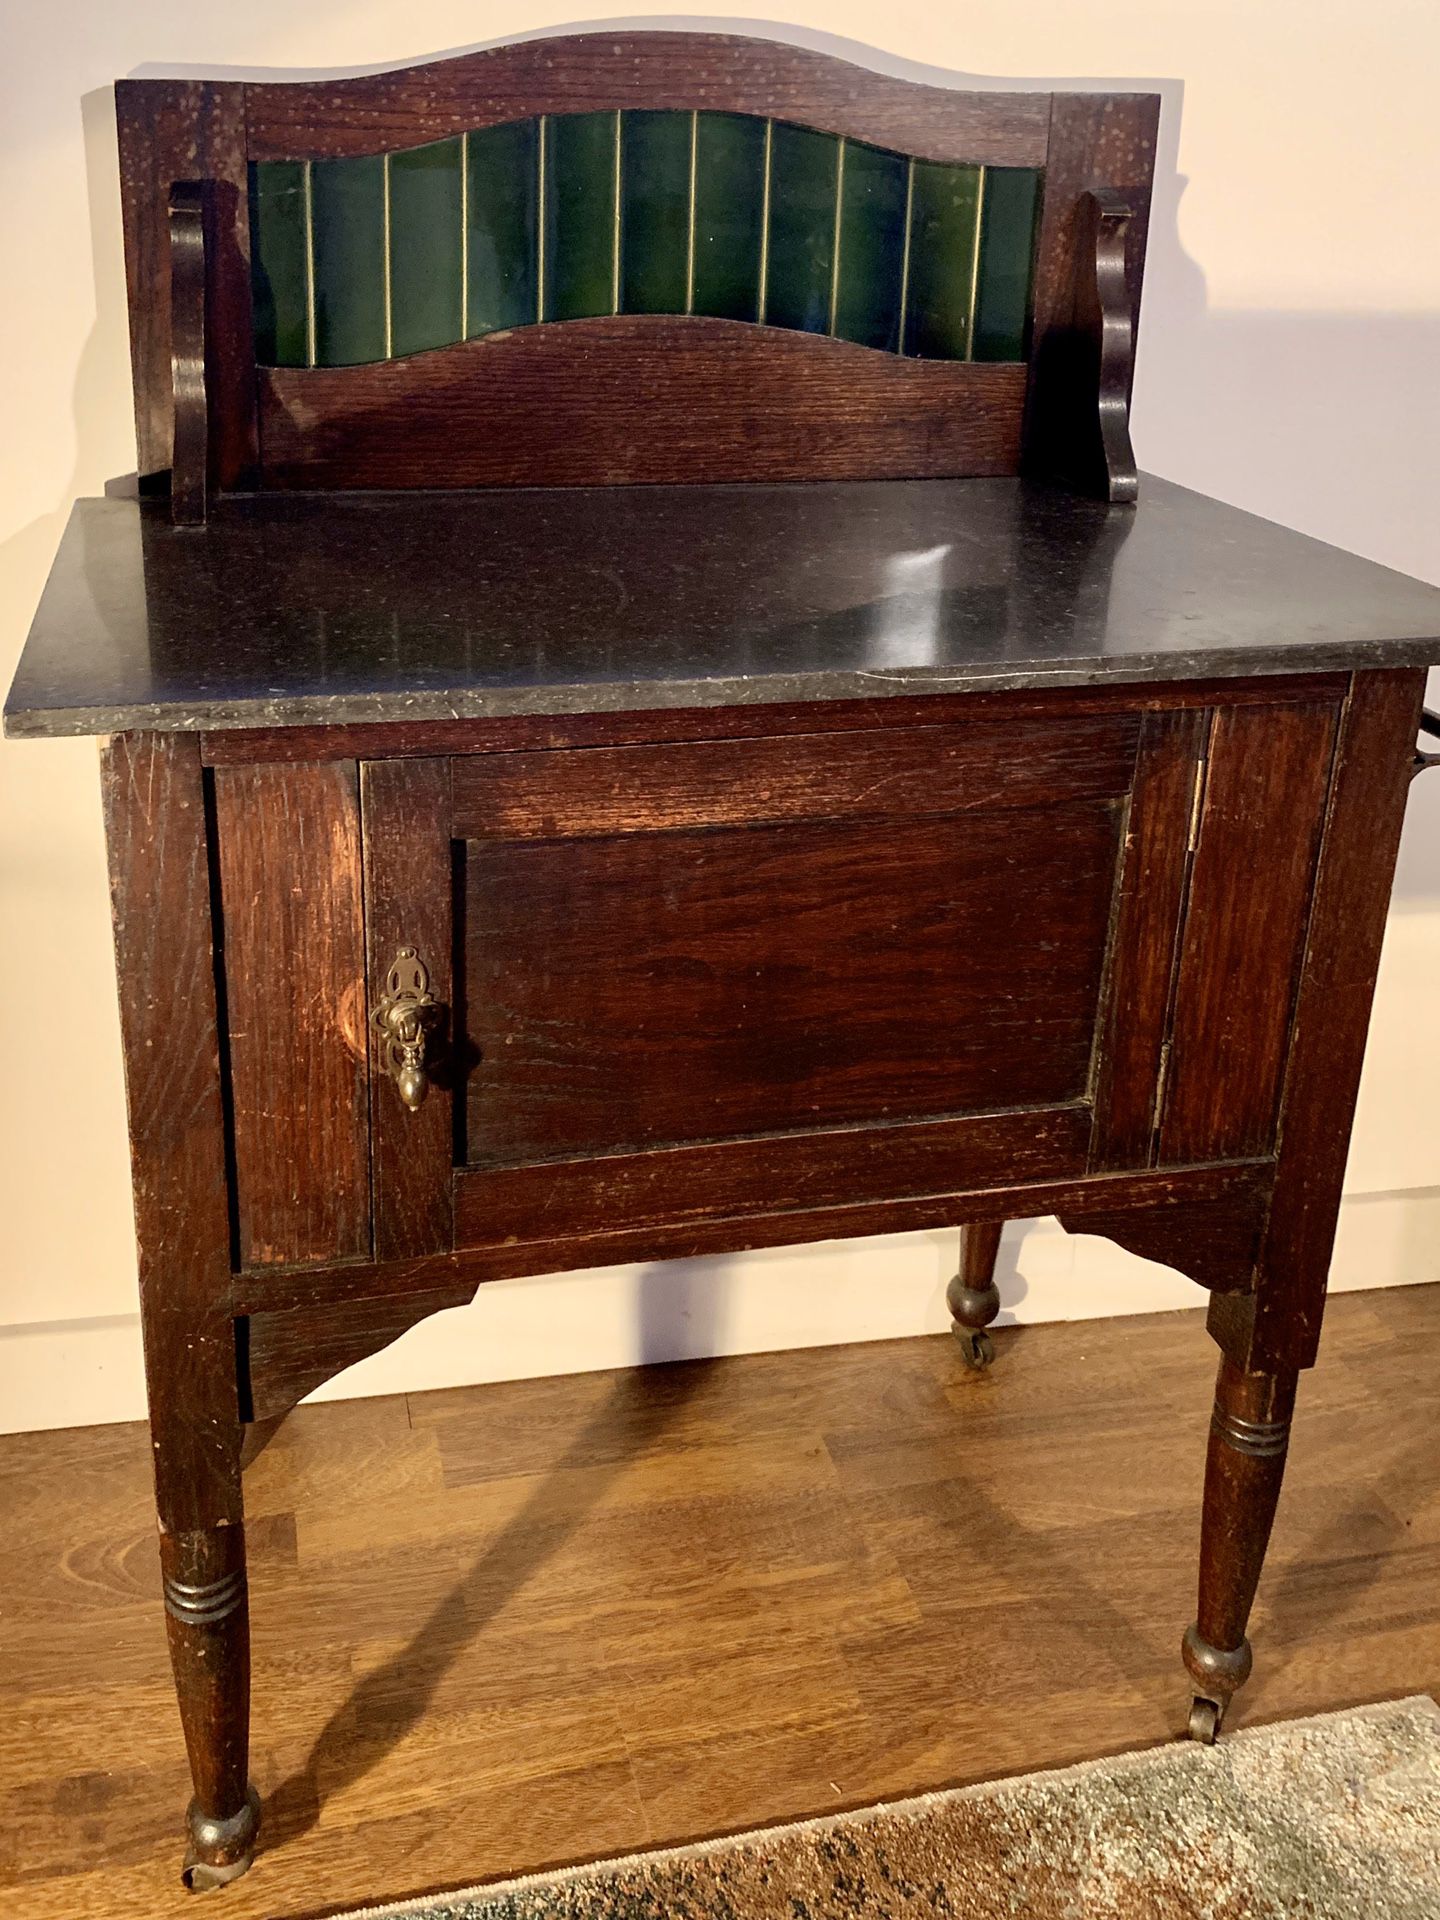 Beautiful Antique Wash Stand with Marble Top.